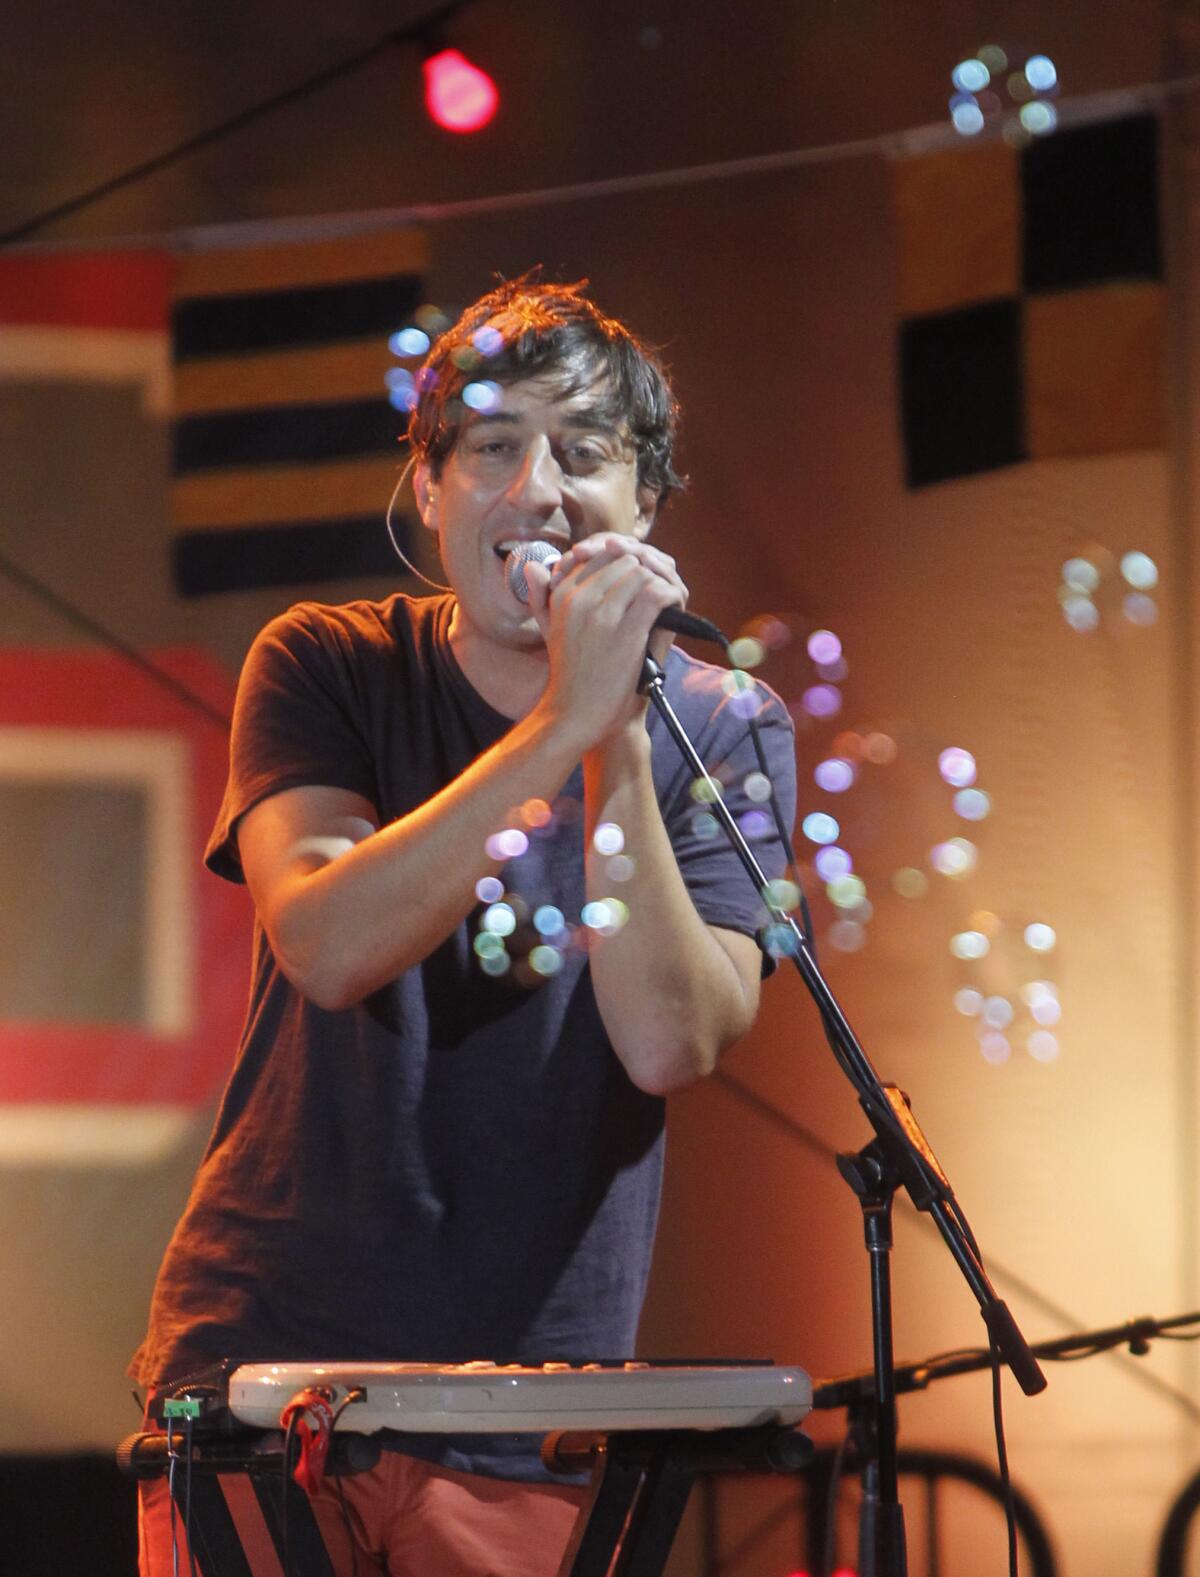 Ed Droste sings into a microphone behind a window in a recording studio.